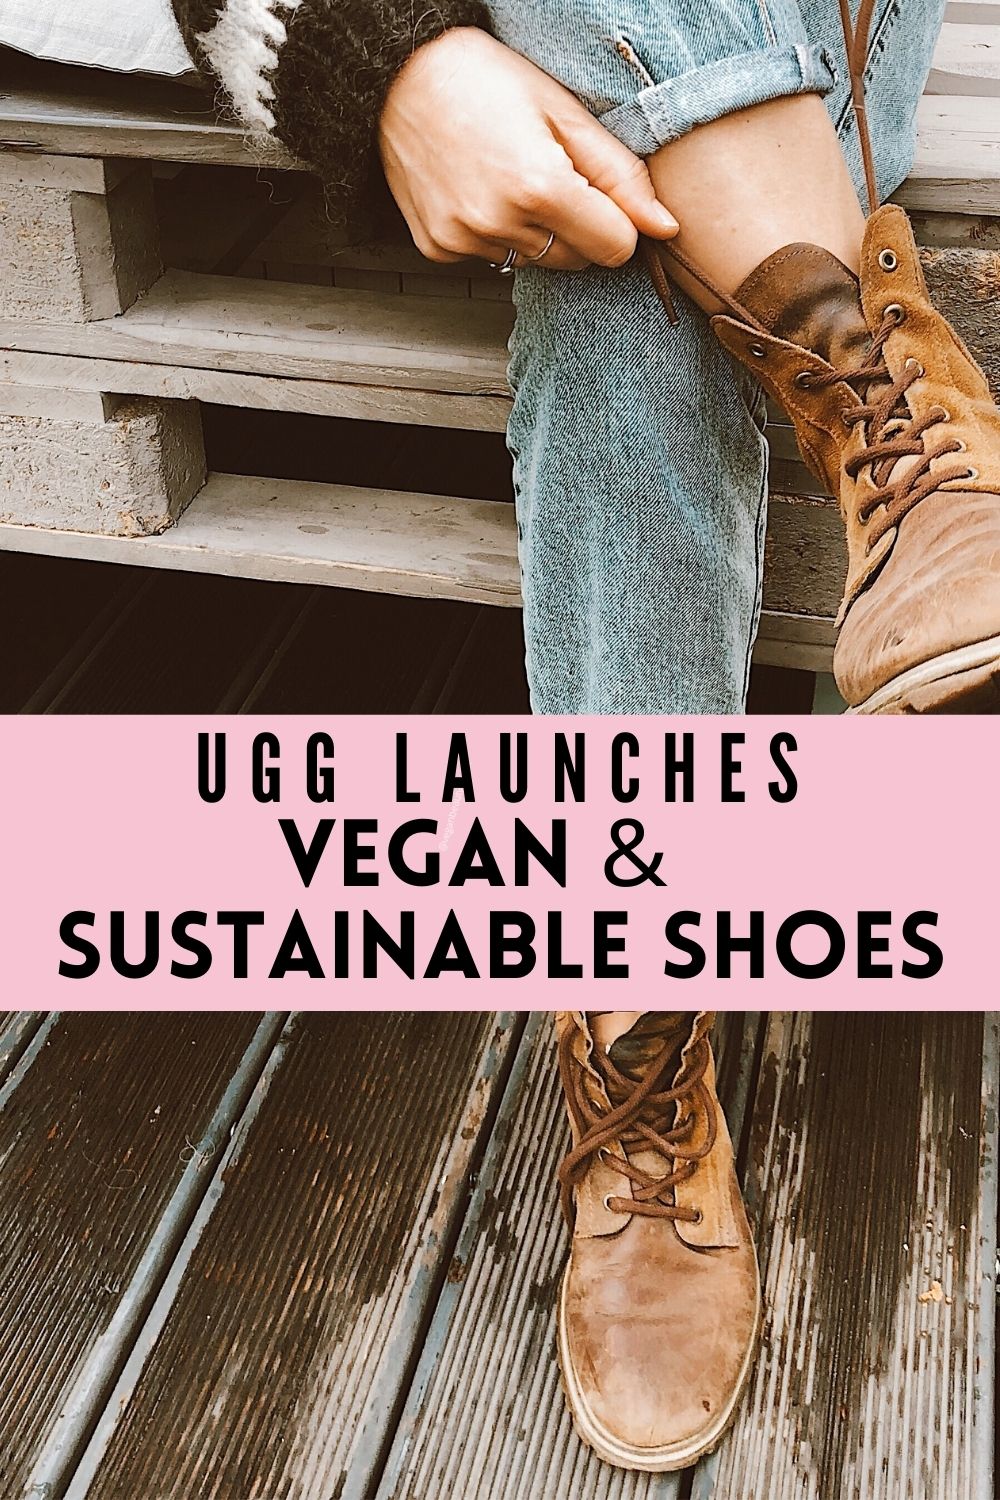 Ugg Launches Vegan and Sustainable Options